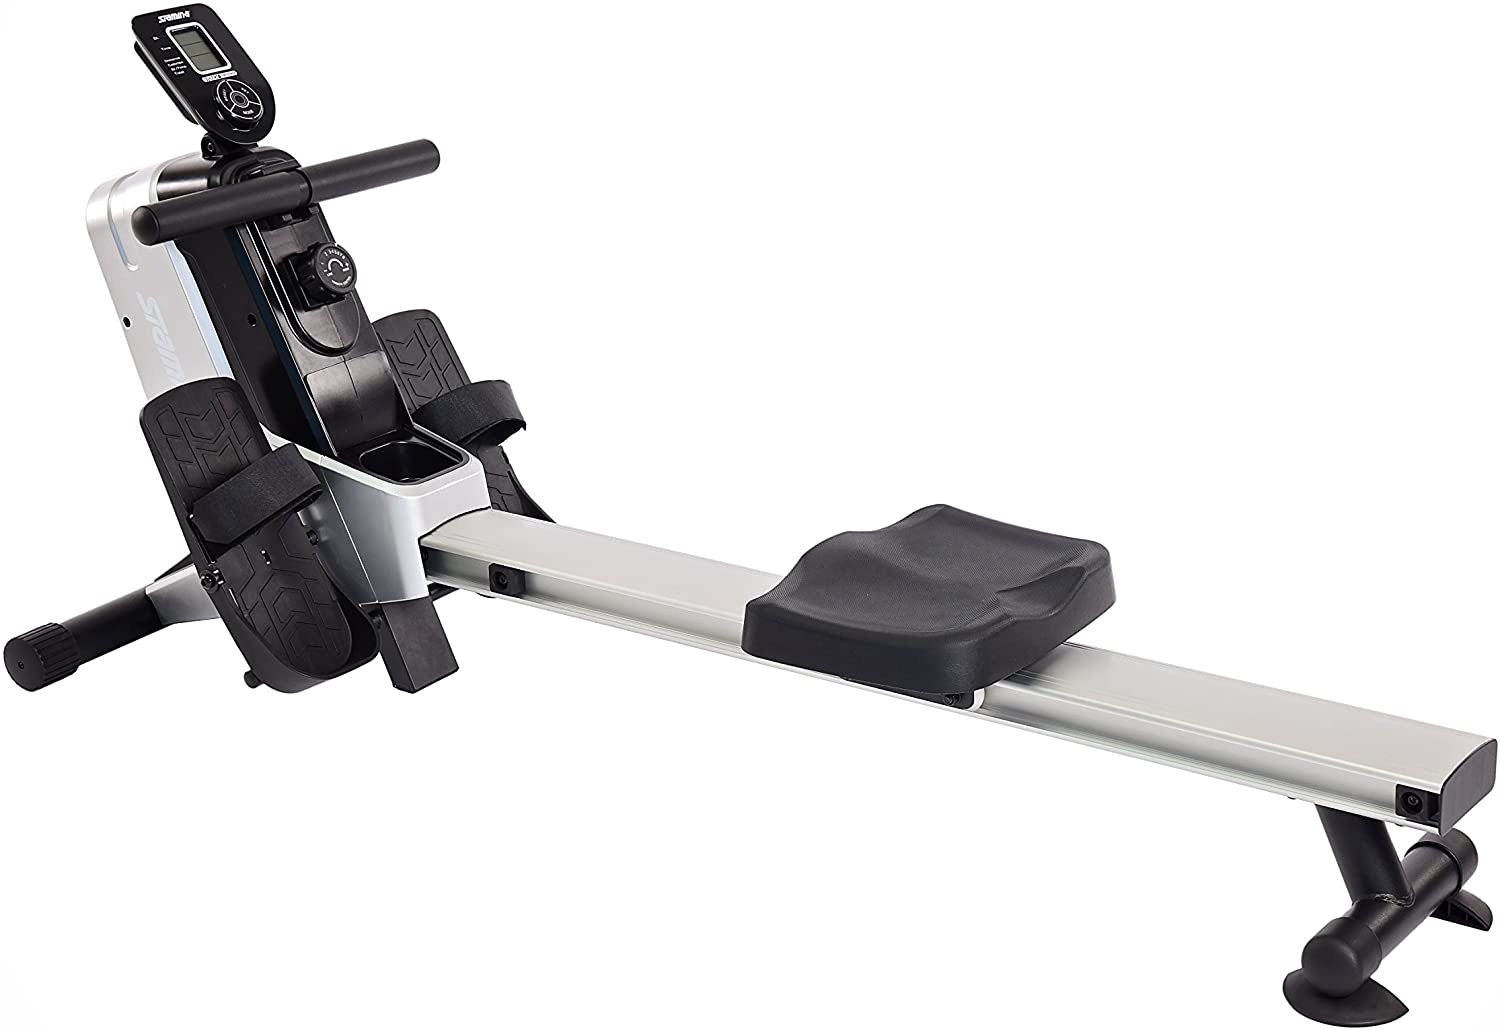 STAMINA A350-700C Programmable Magnetic Rower Owner’s Manual